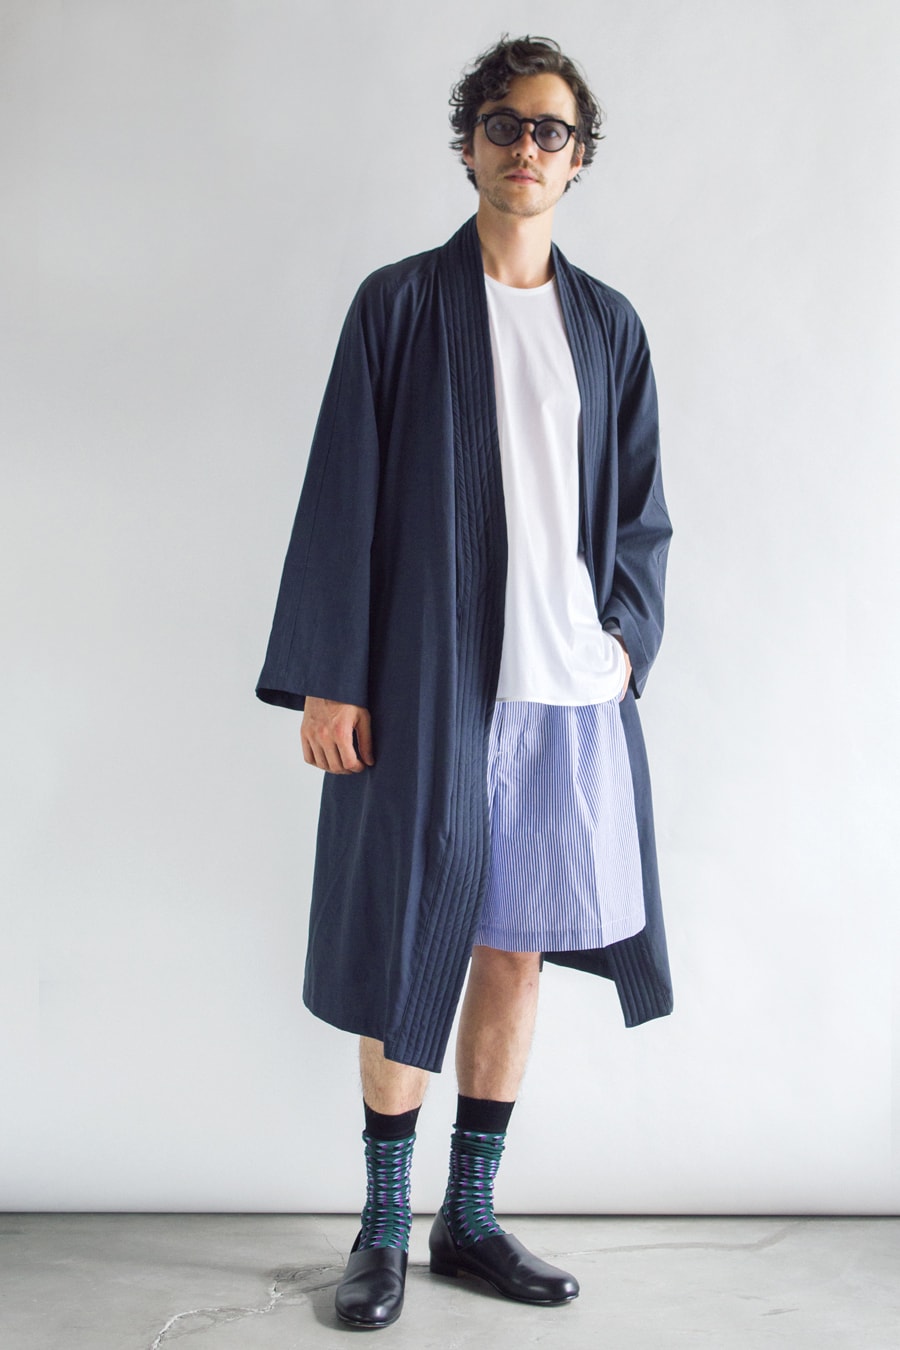 Rainmaker Kyoto Spring Summer 2019 Lookbook collection japan suiting tailoring style gown coat men women kimono